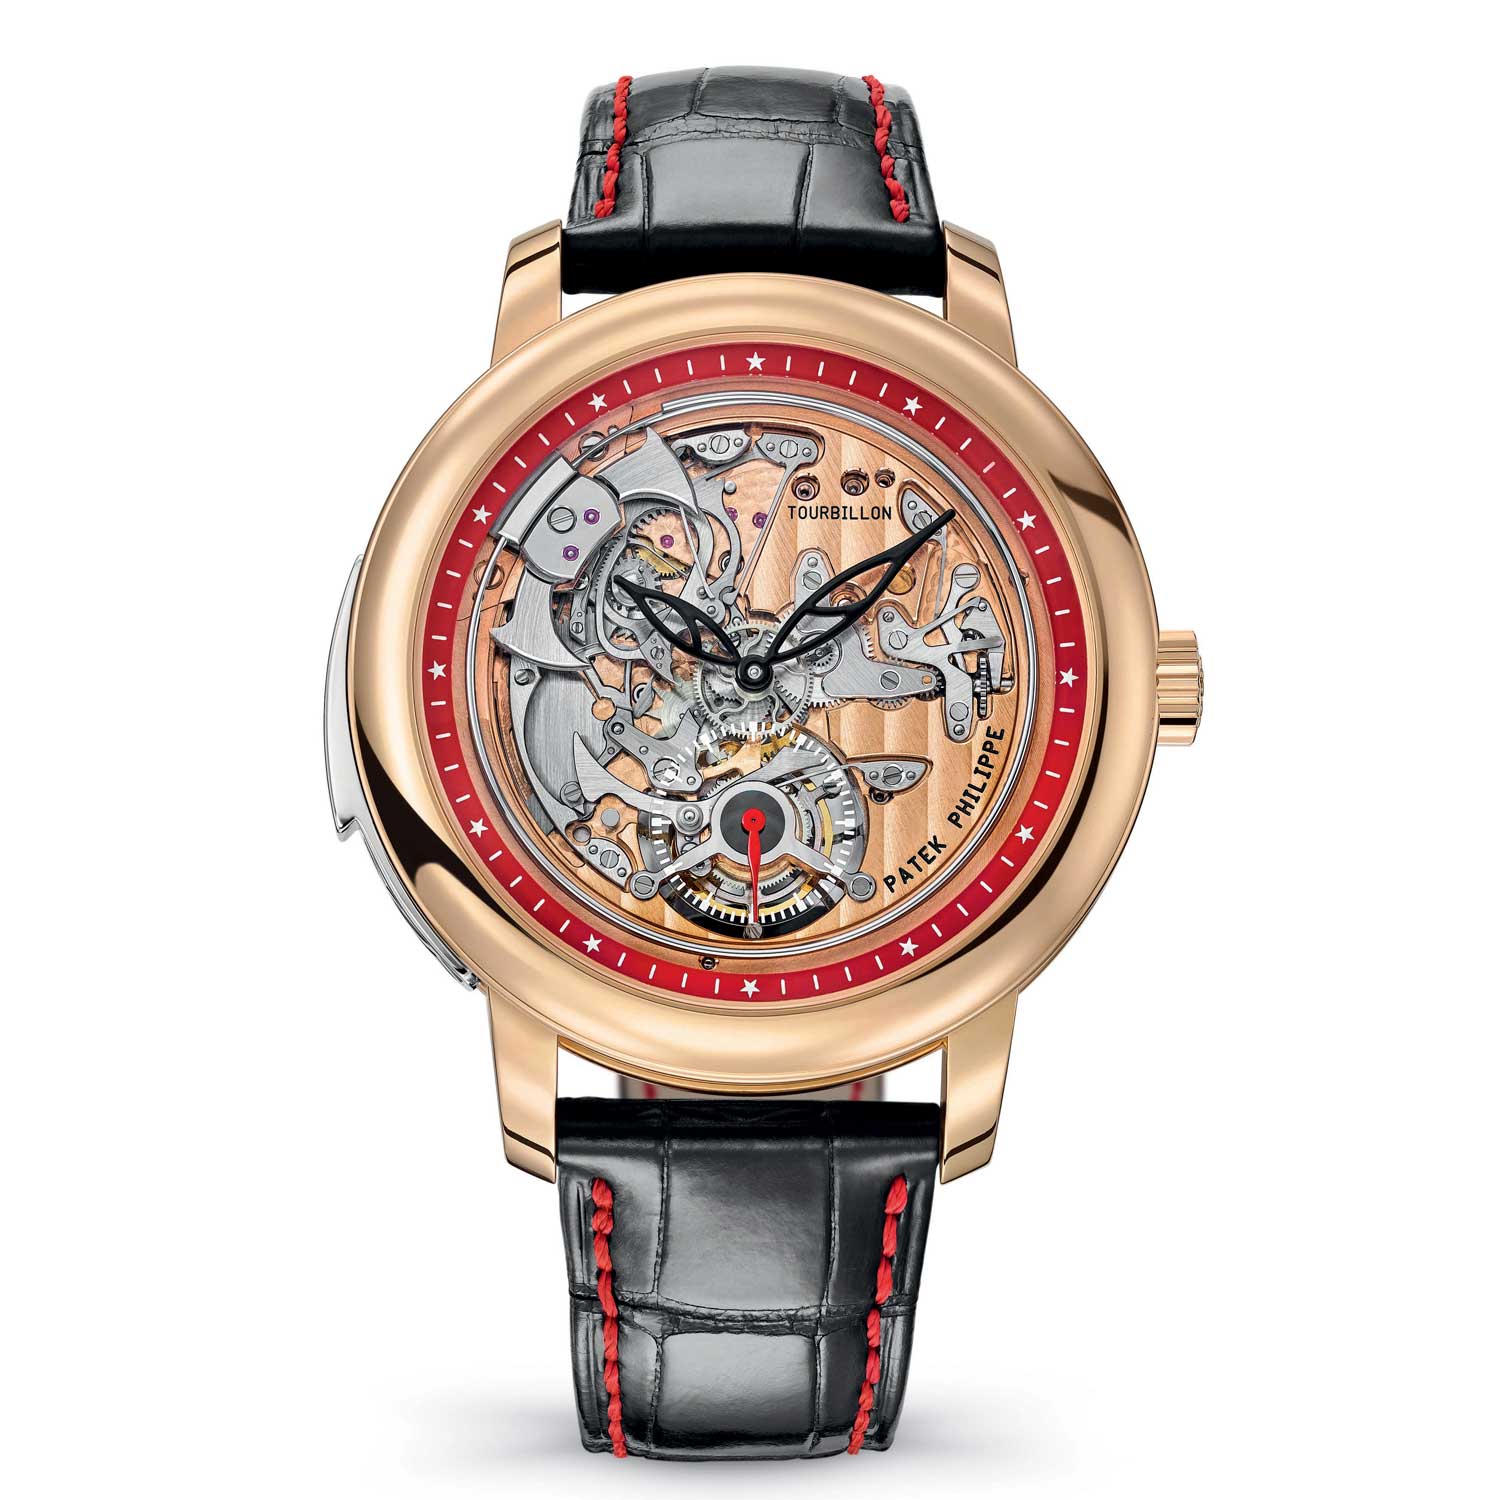 Patek Philippe Ref. 5303R Grand Complication in Rose Gold